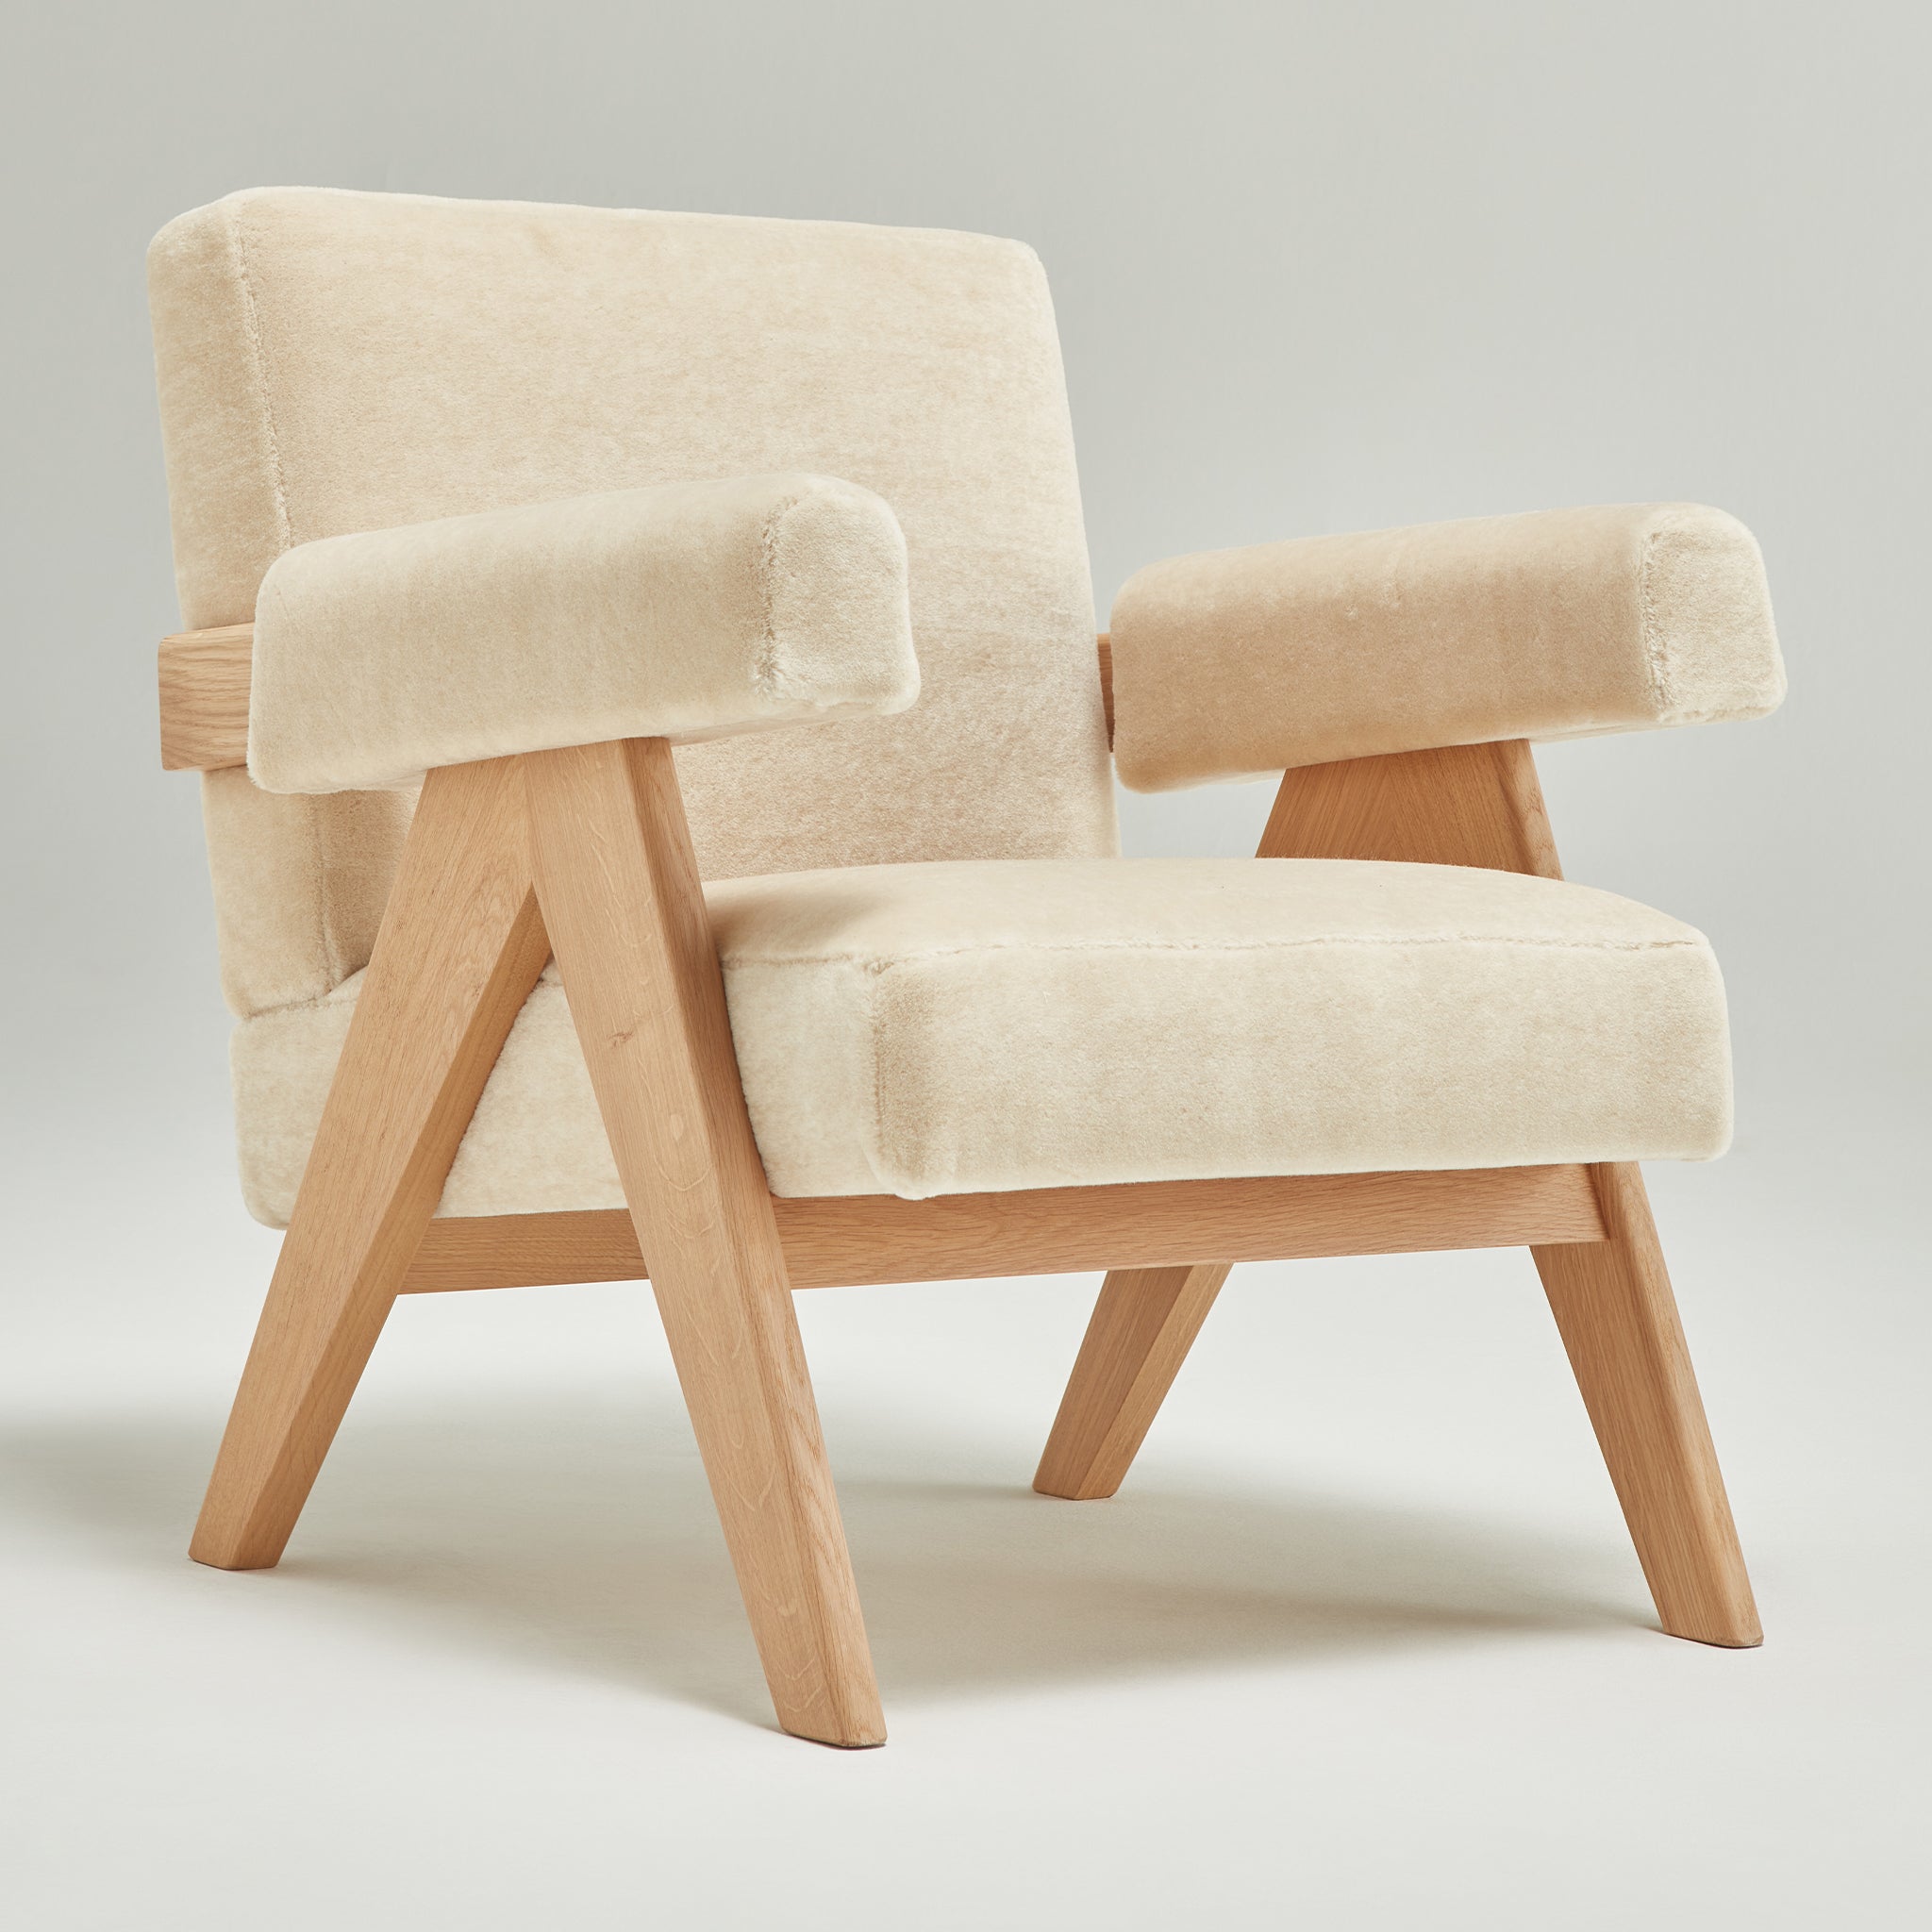 Main view of an authentic chandigarh lounge chair, pierre jeanneret era, natural oak frame, pierre frey sable teddy mohair upholstery, by Klarel #K35-35